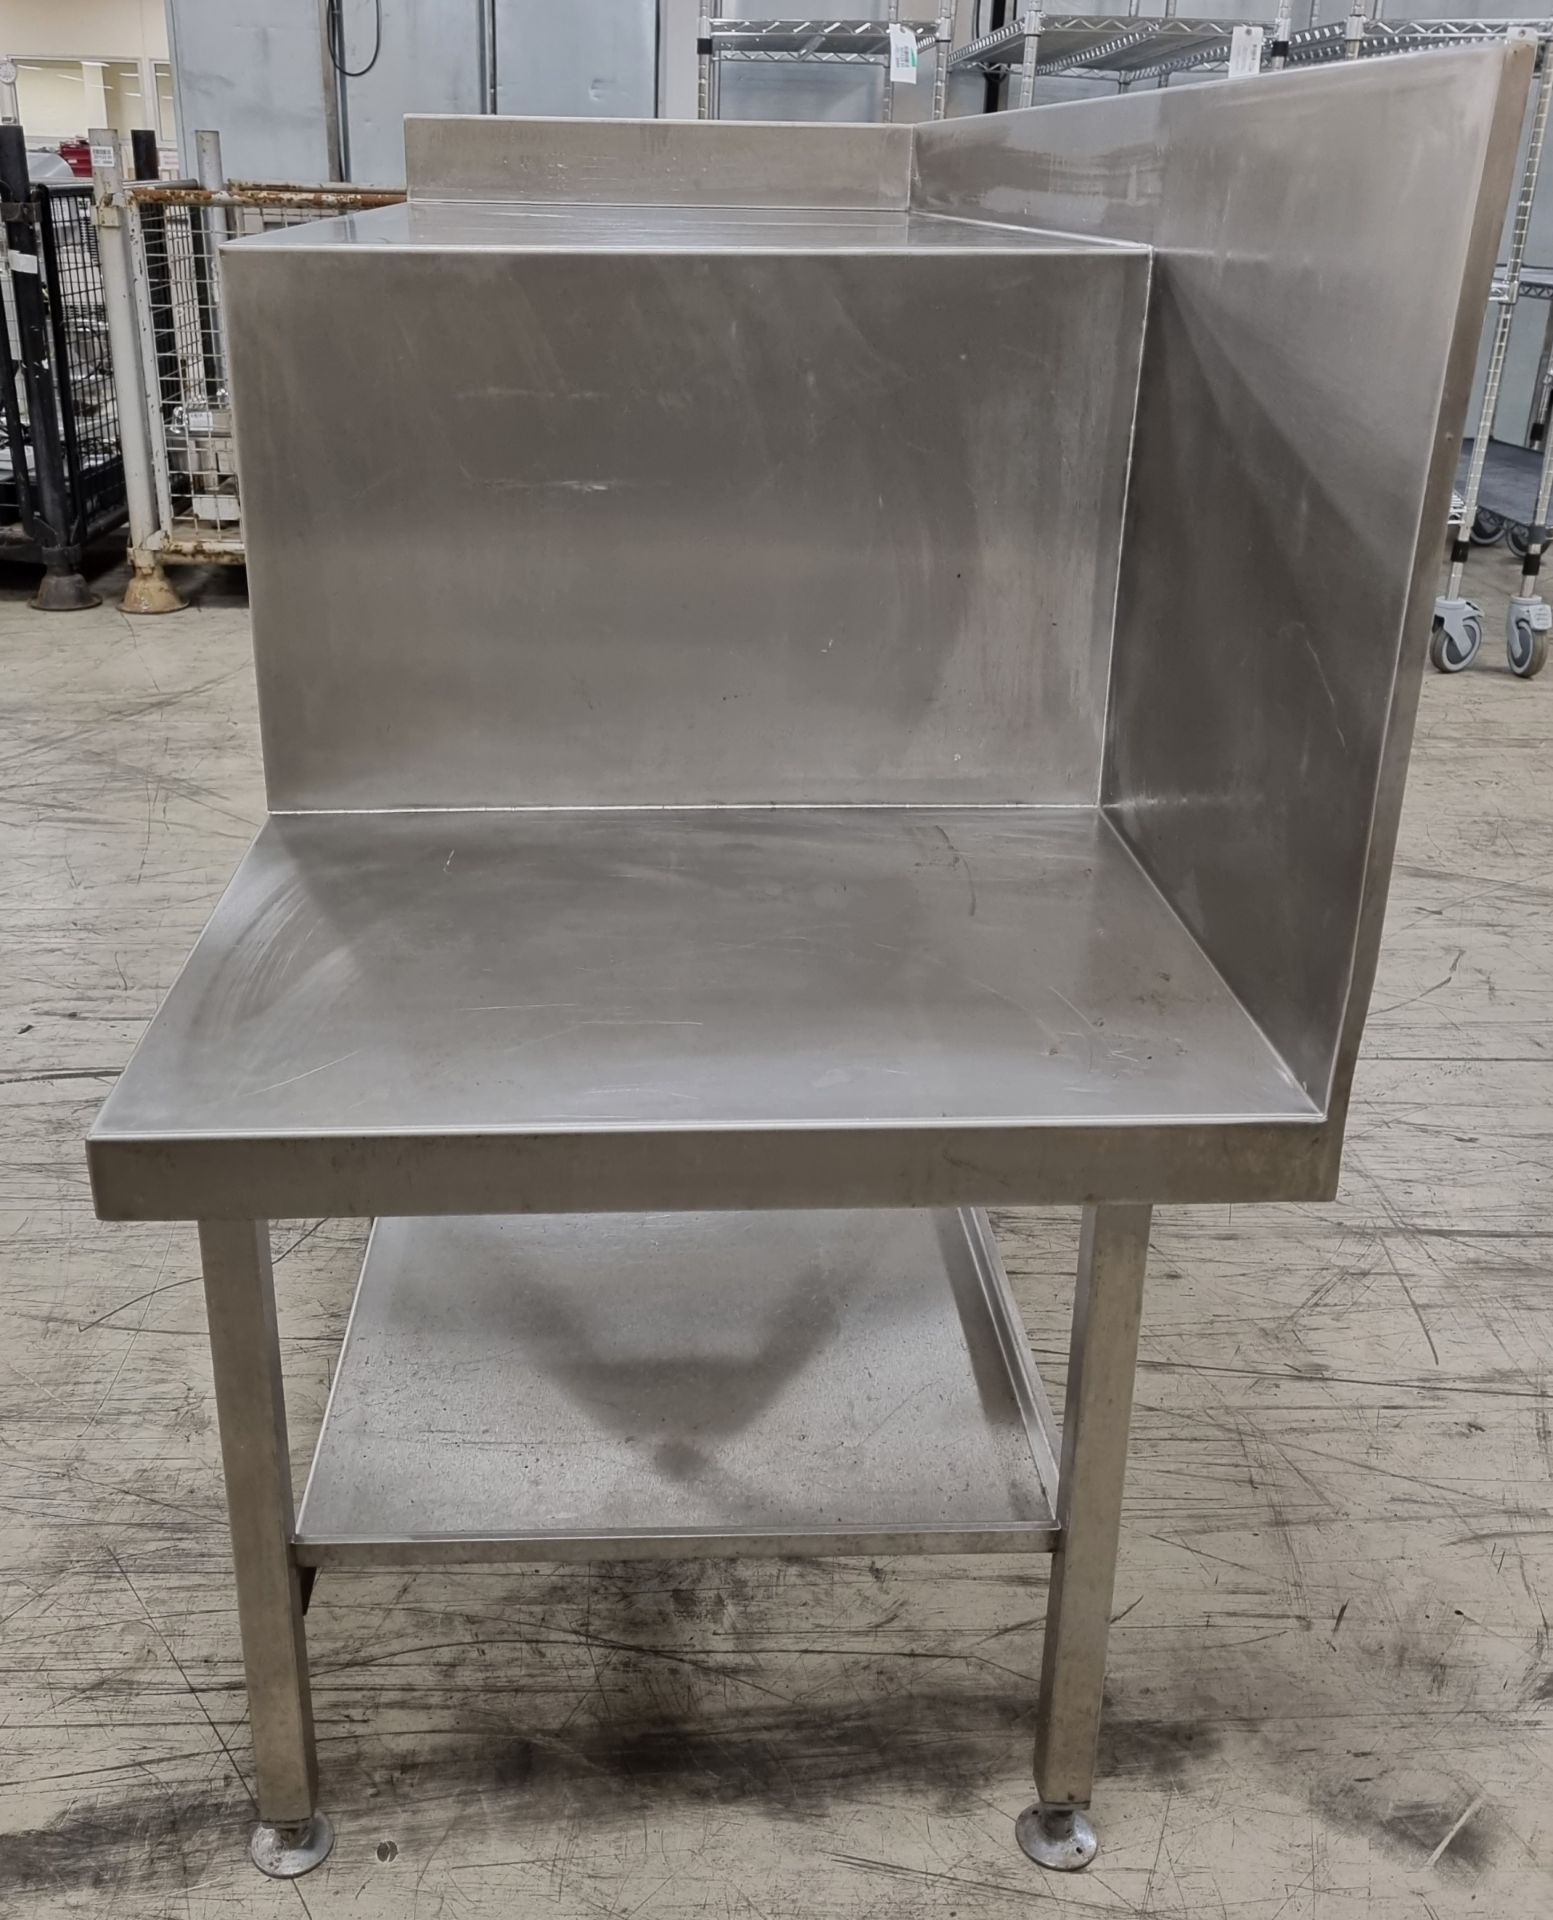 Stainless steel table with two side shelfs built in plus tray rack - Image 5 of 6